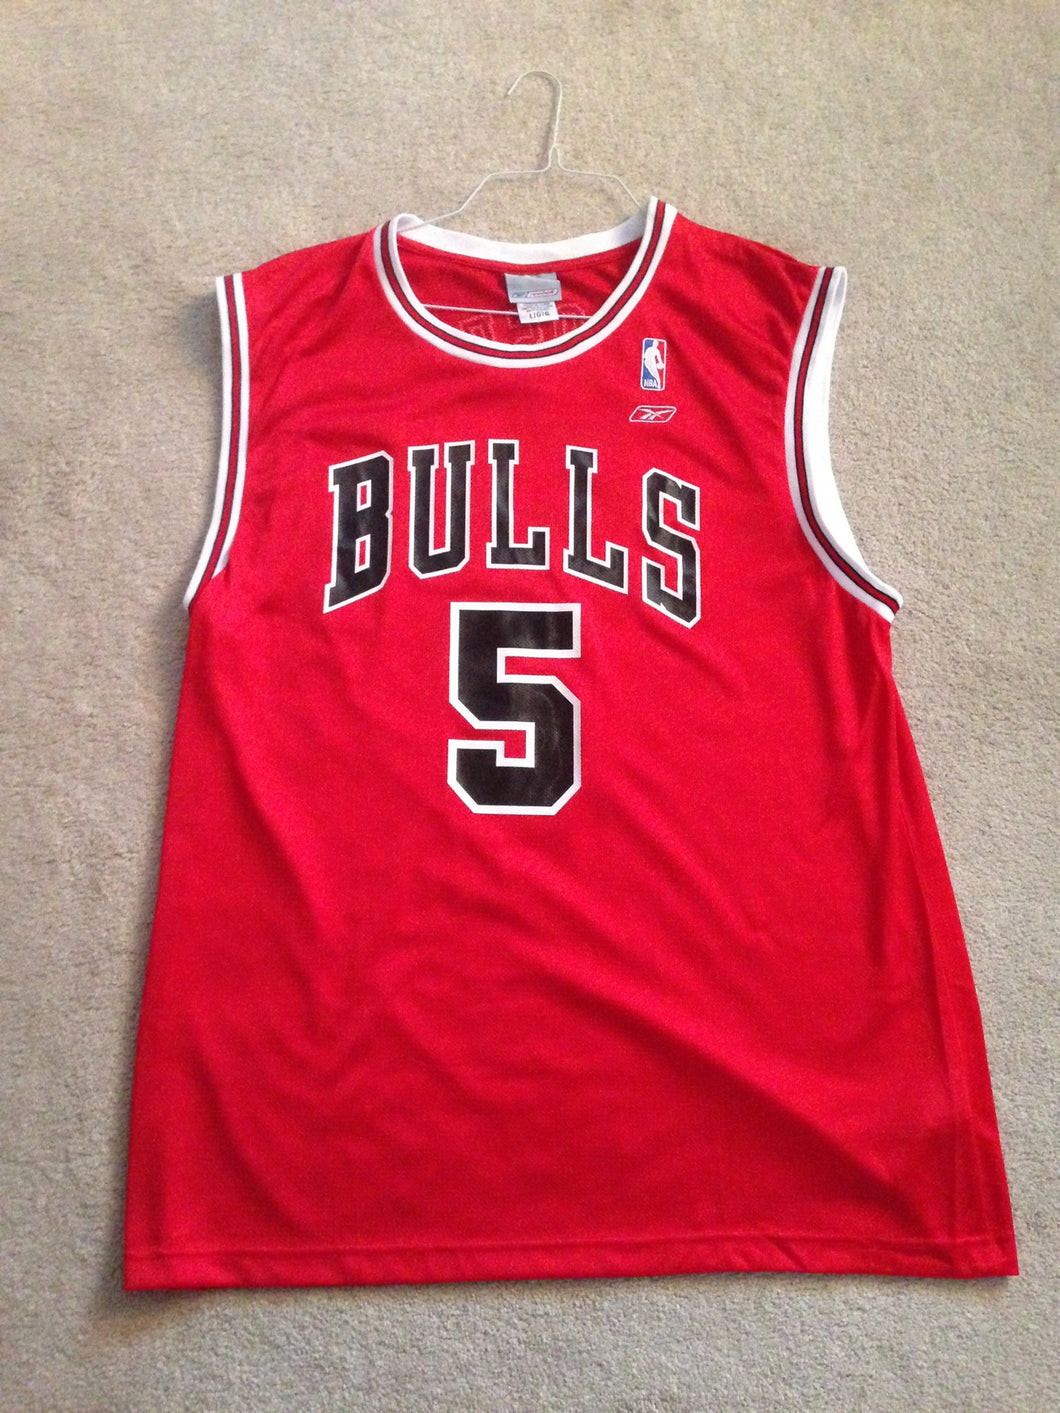 derrick rose jersey for sale philippines